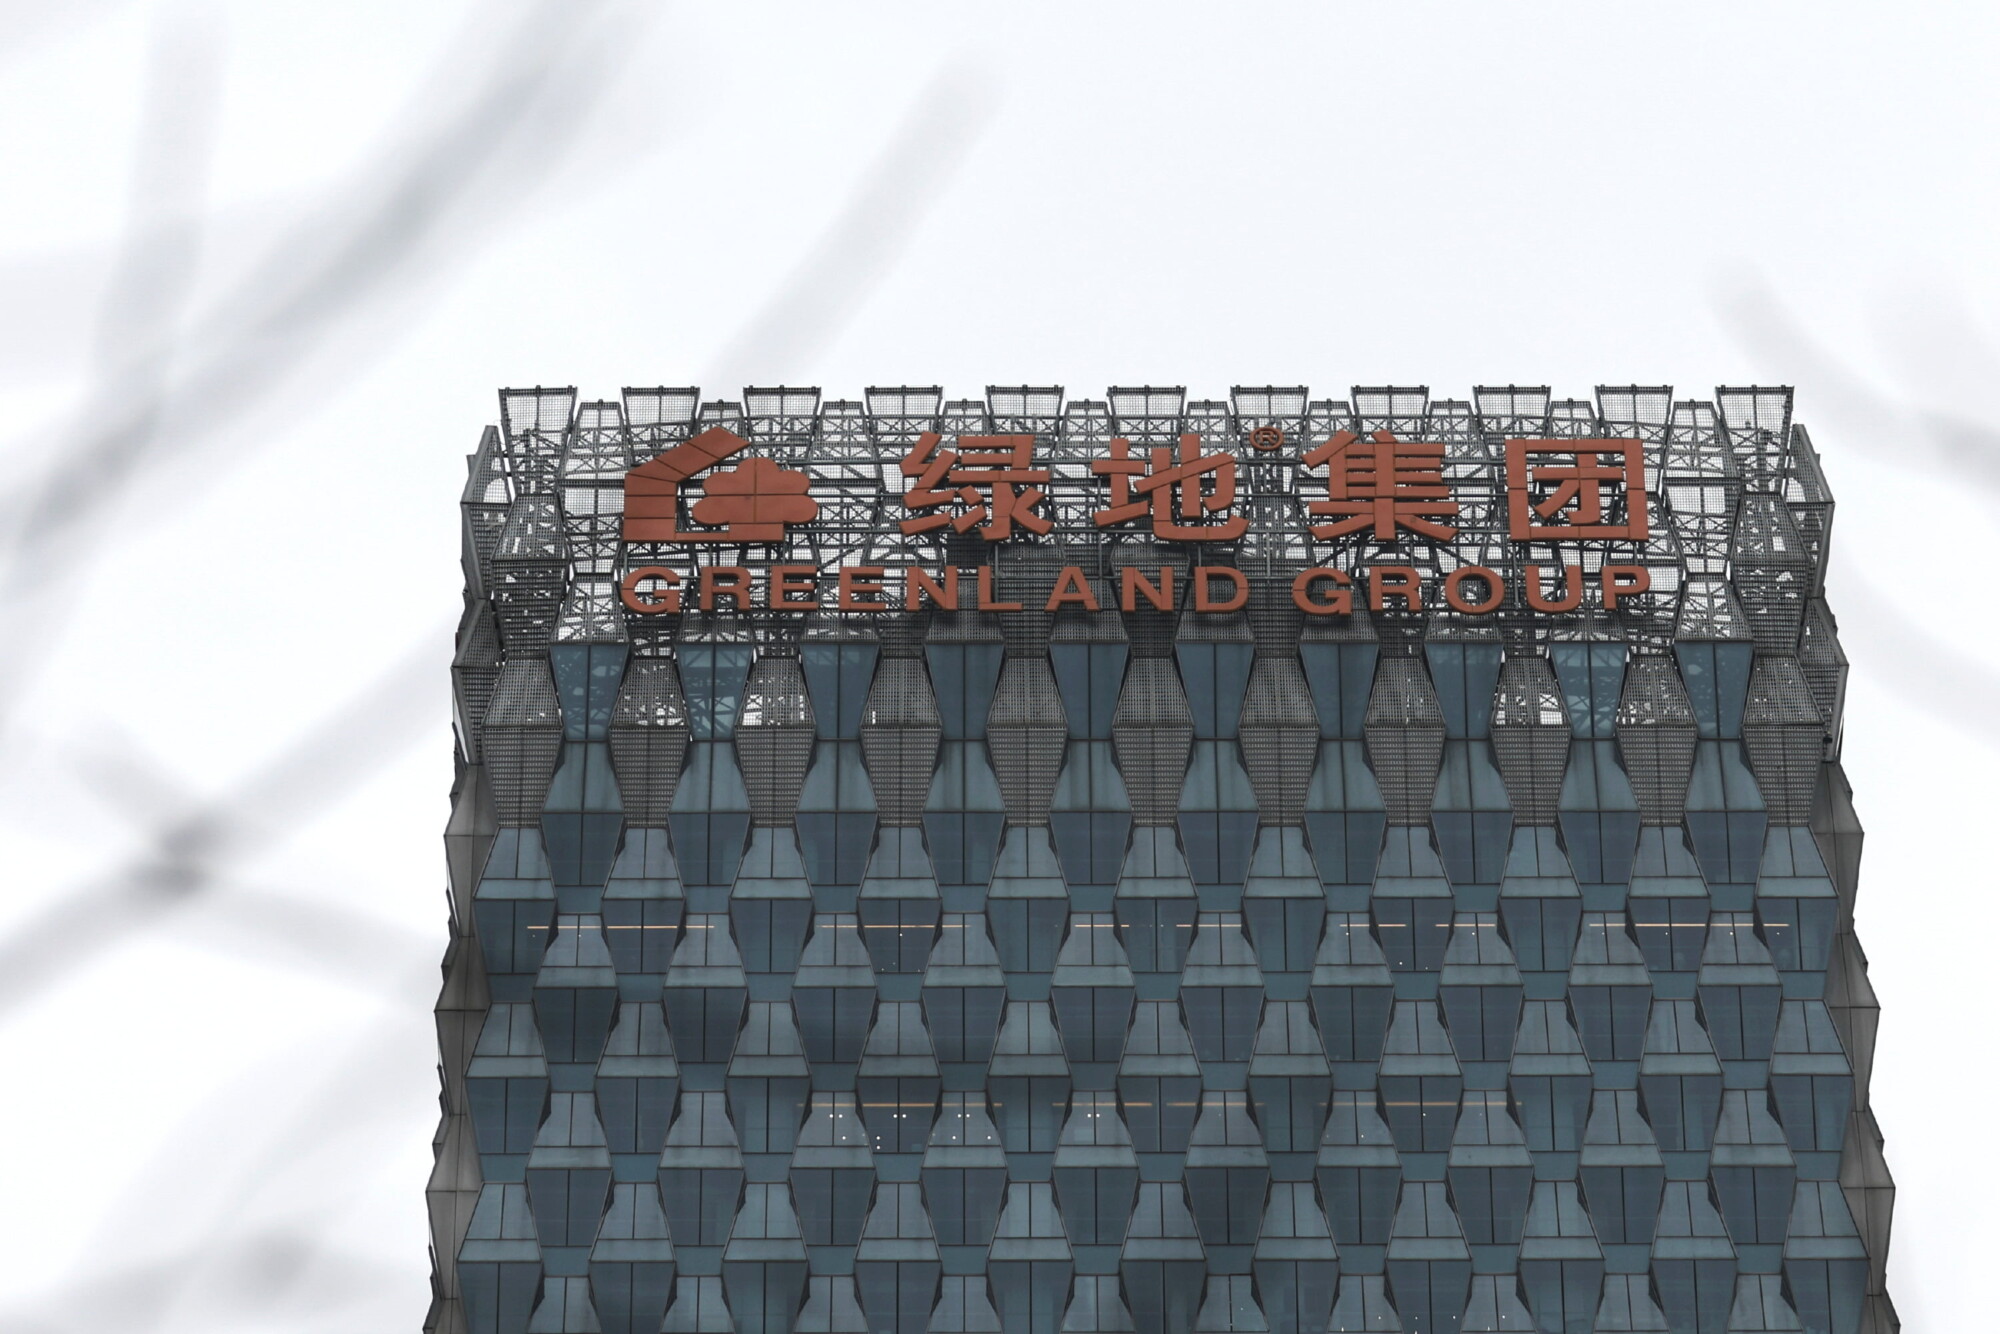 S&P Cuts Chinese State-Backed Developer Greenland to ‘Selective Default’